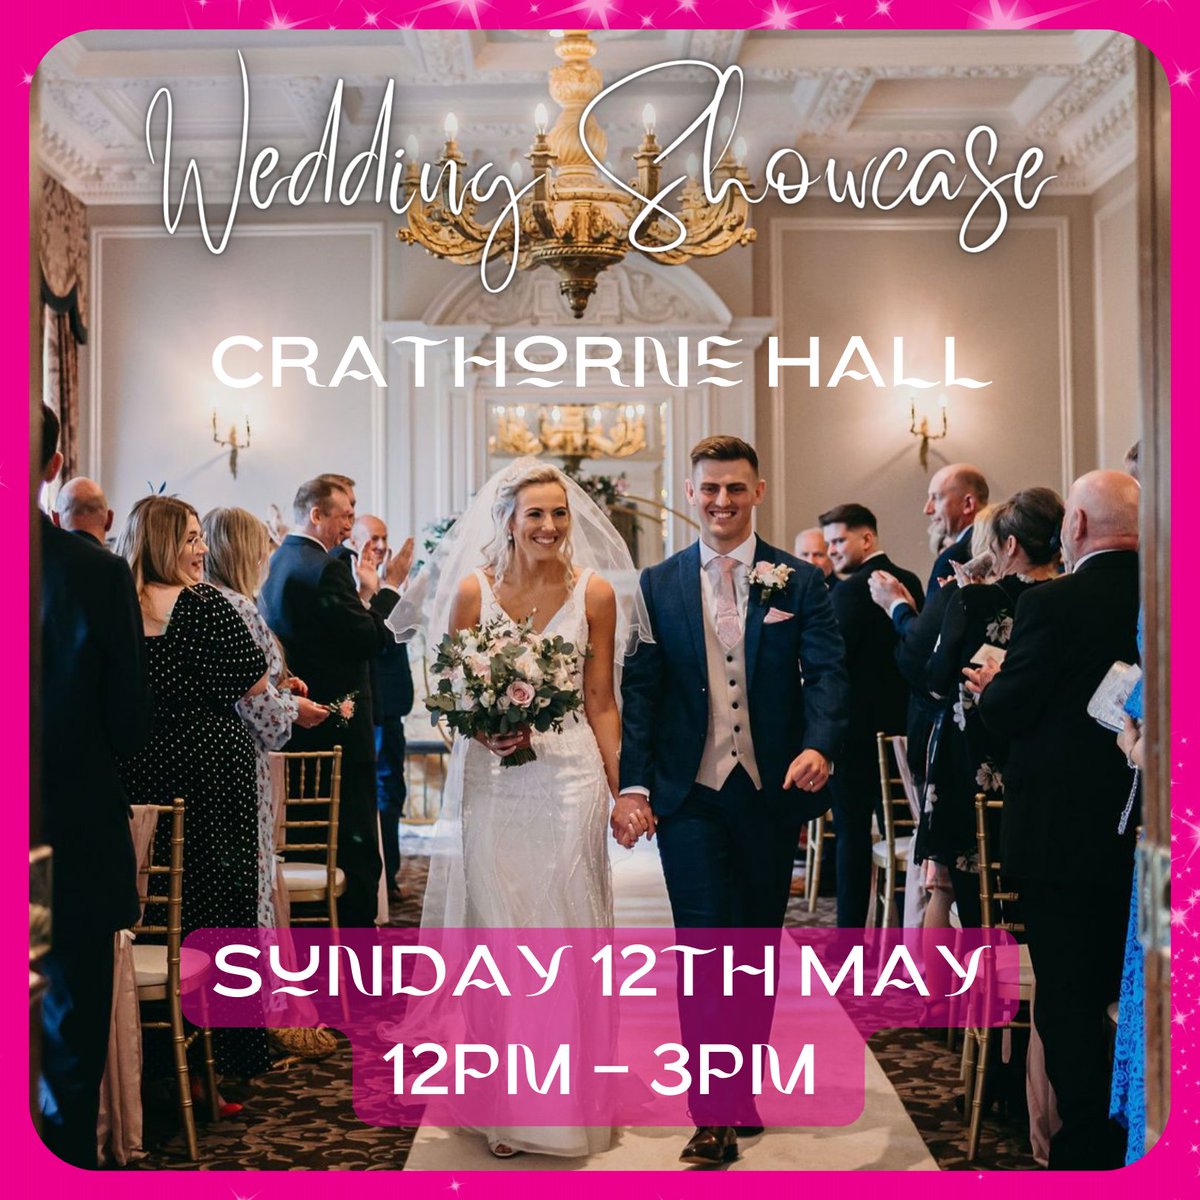 Say 'I do' at these wonderful 𝘄𝗲𝗱𝗱𝗶𝗻𝗴 𝘀𝗵𝗼𝘄𝗰𝗮𝘀𝗲𝘀 coming up tomorrow, Sunday 12th May! 💖 @TheRedworthHall 11am- 2pm 💖 Crathorne Hall 12pm - 3pm All the inspiration you need to plan the perfect day. 💍🎉 #weddingshowcase #weddinginspo #happilyeverafter